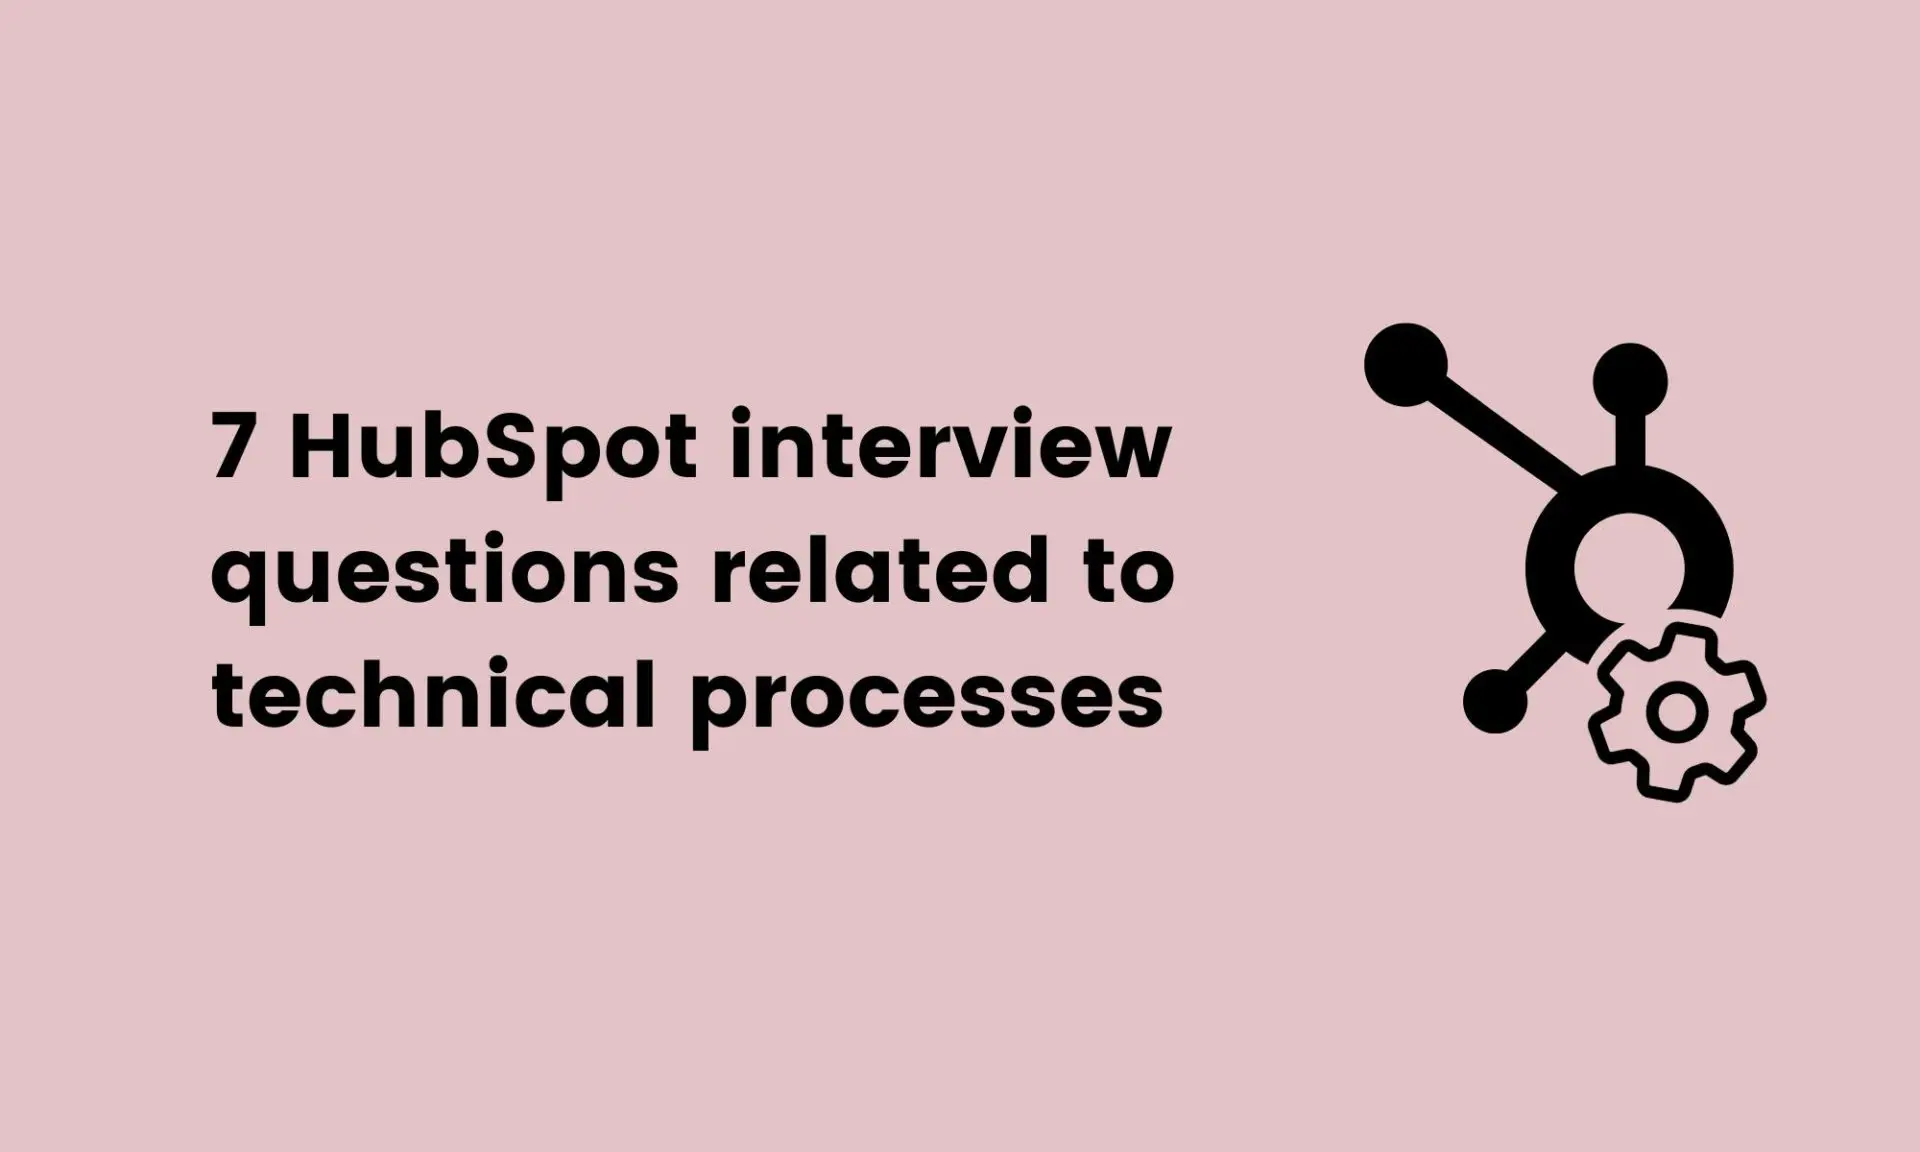 image showing 7 HubSpot interview questions related to technical processes